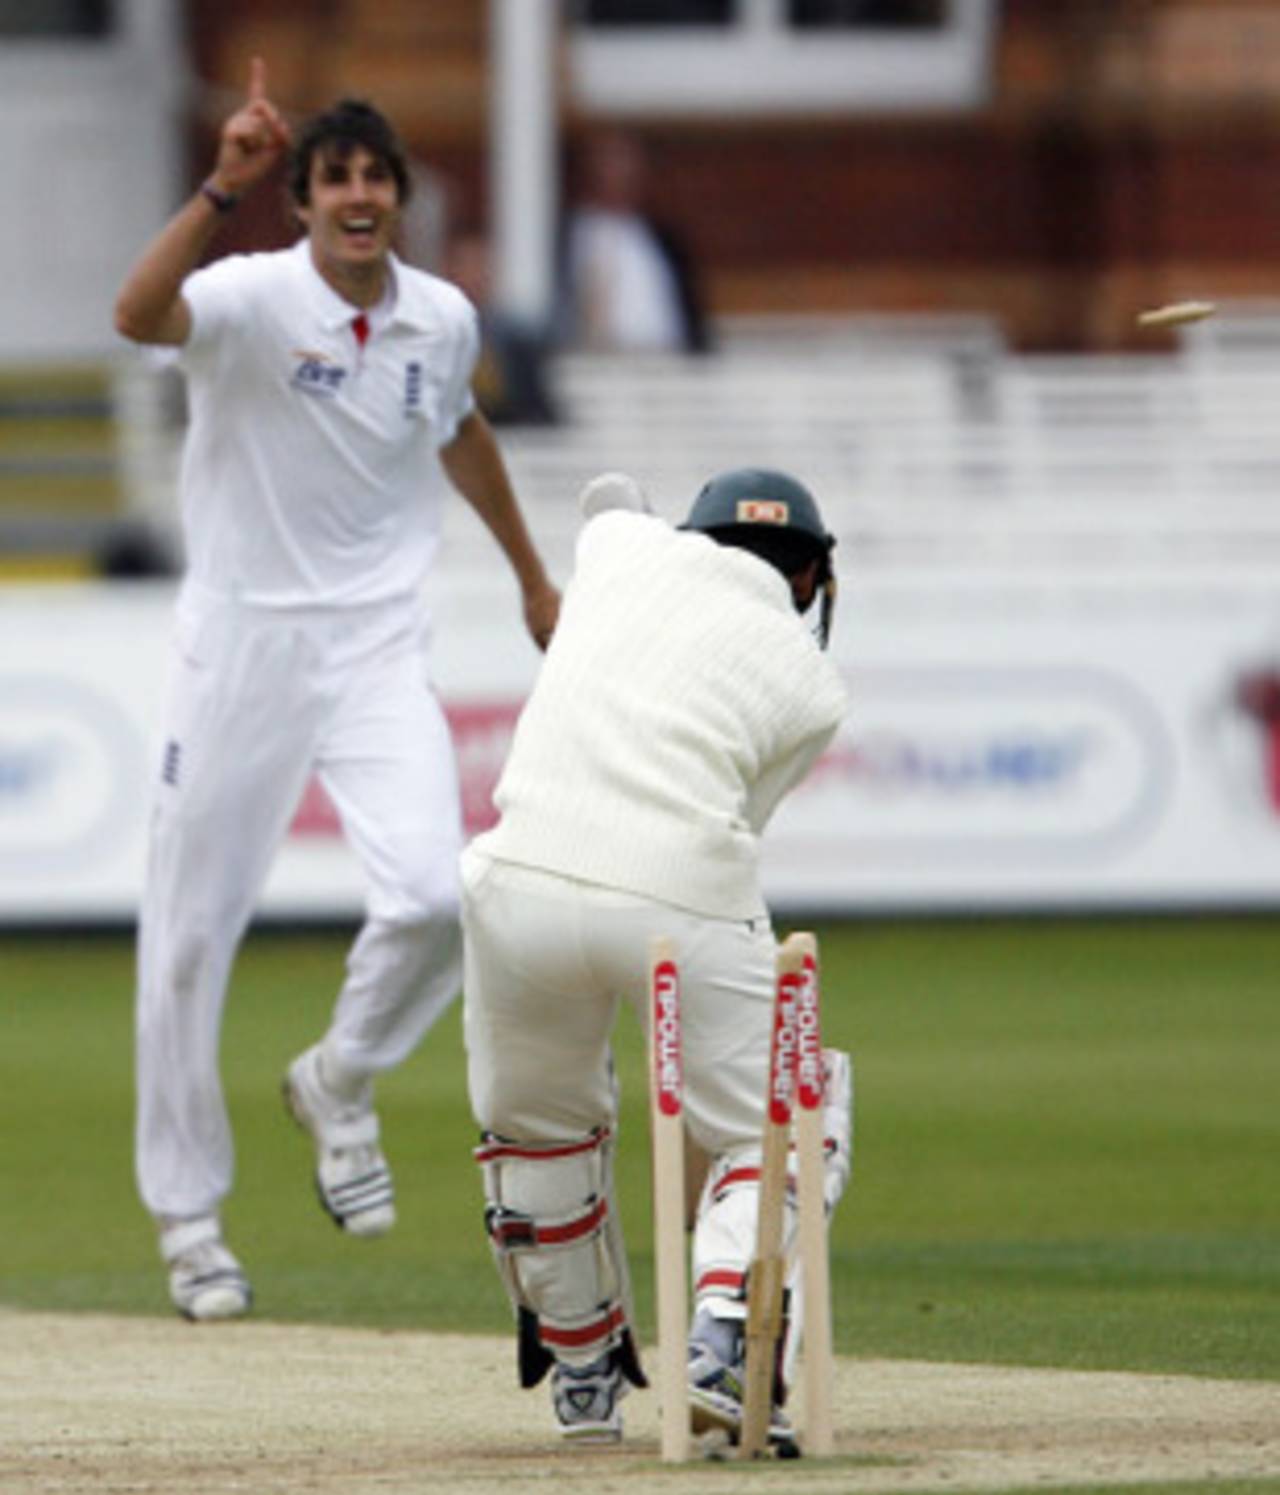 Steven Finn removed Mushfiqur Rahim with the second new ball, England v Bangladesh, 1st Test, Lord's, May 29, 2010